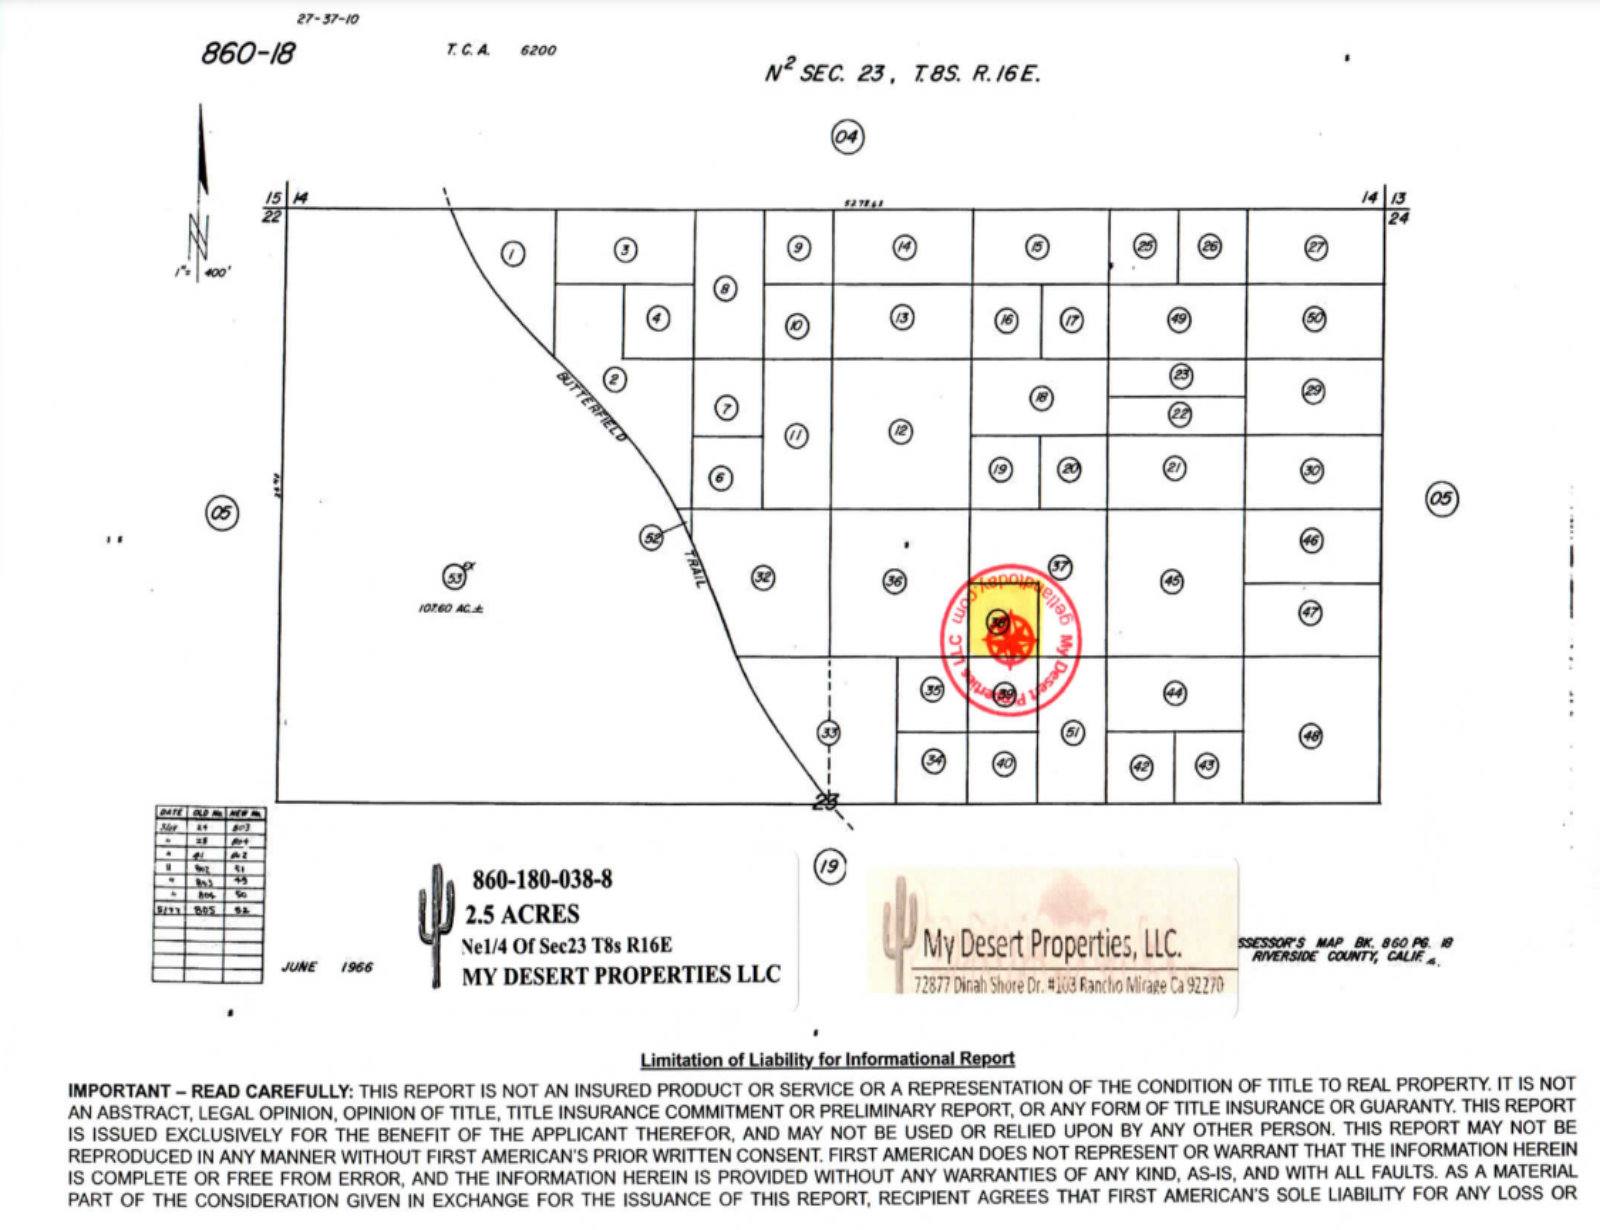 *NEW* RECREATIONAL 2.5 ACRES NEAR CHUCKWALLA MOUNTAINS!! LOW MONTHLY PAYMENTS OF $100.00  APN: 860-180-038-000 - Get Land Today